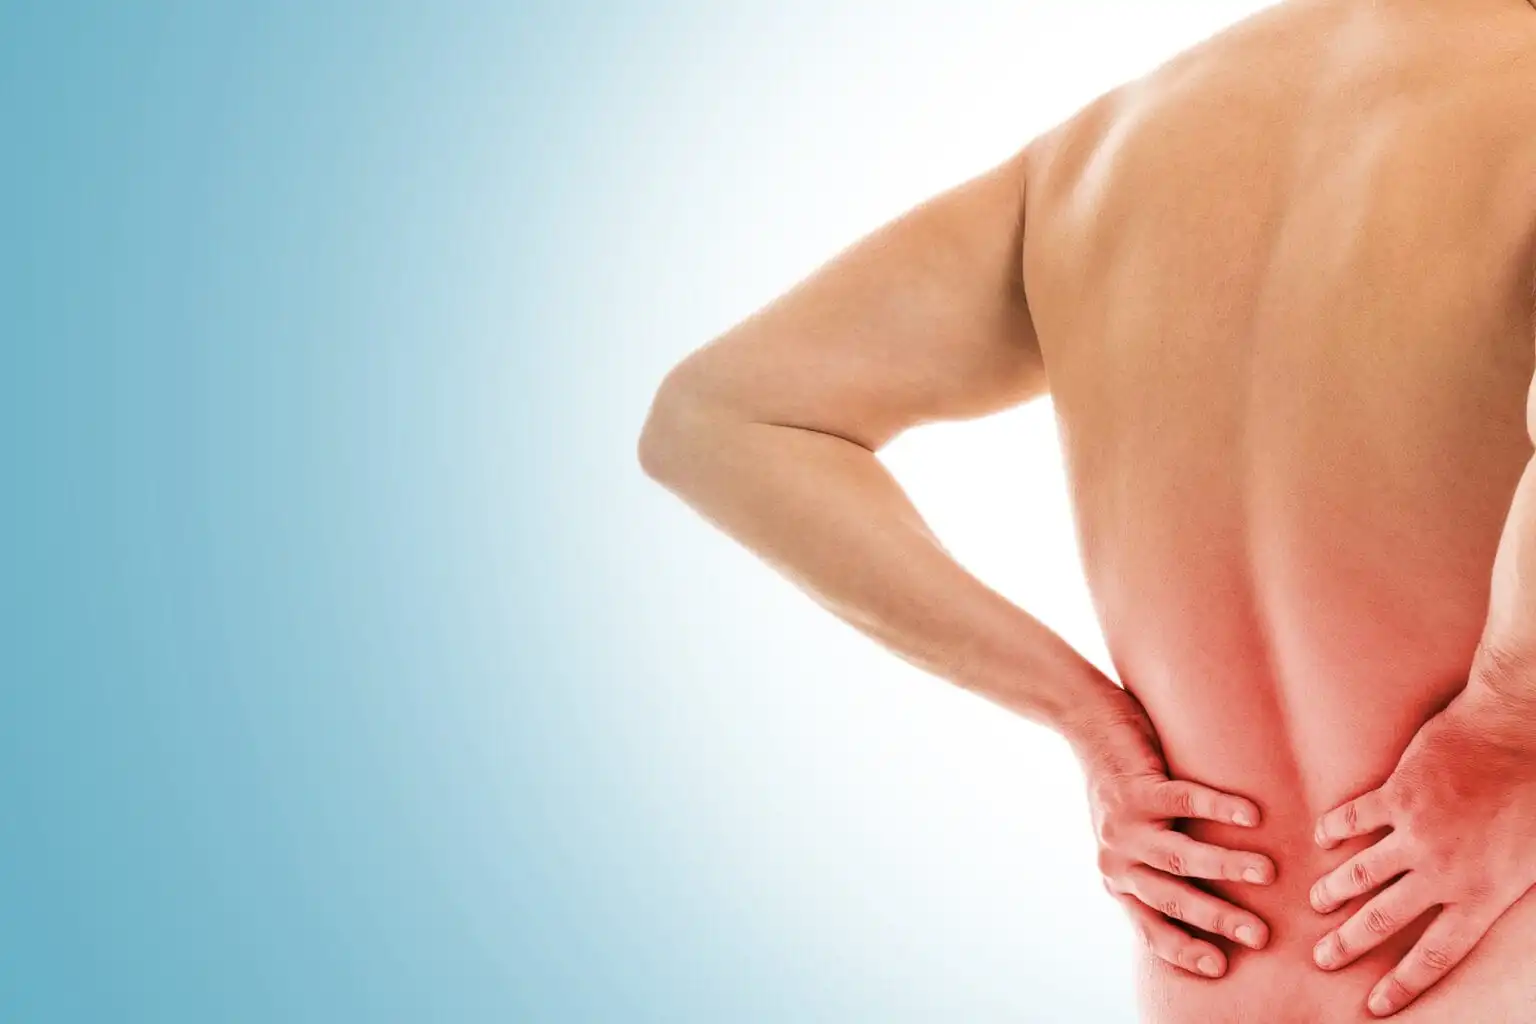 Back Pain Treatment in Pune by Specialists at Human Mechanic Clinic